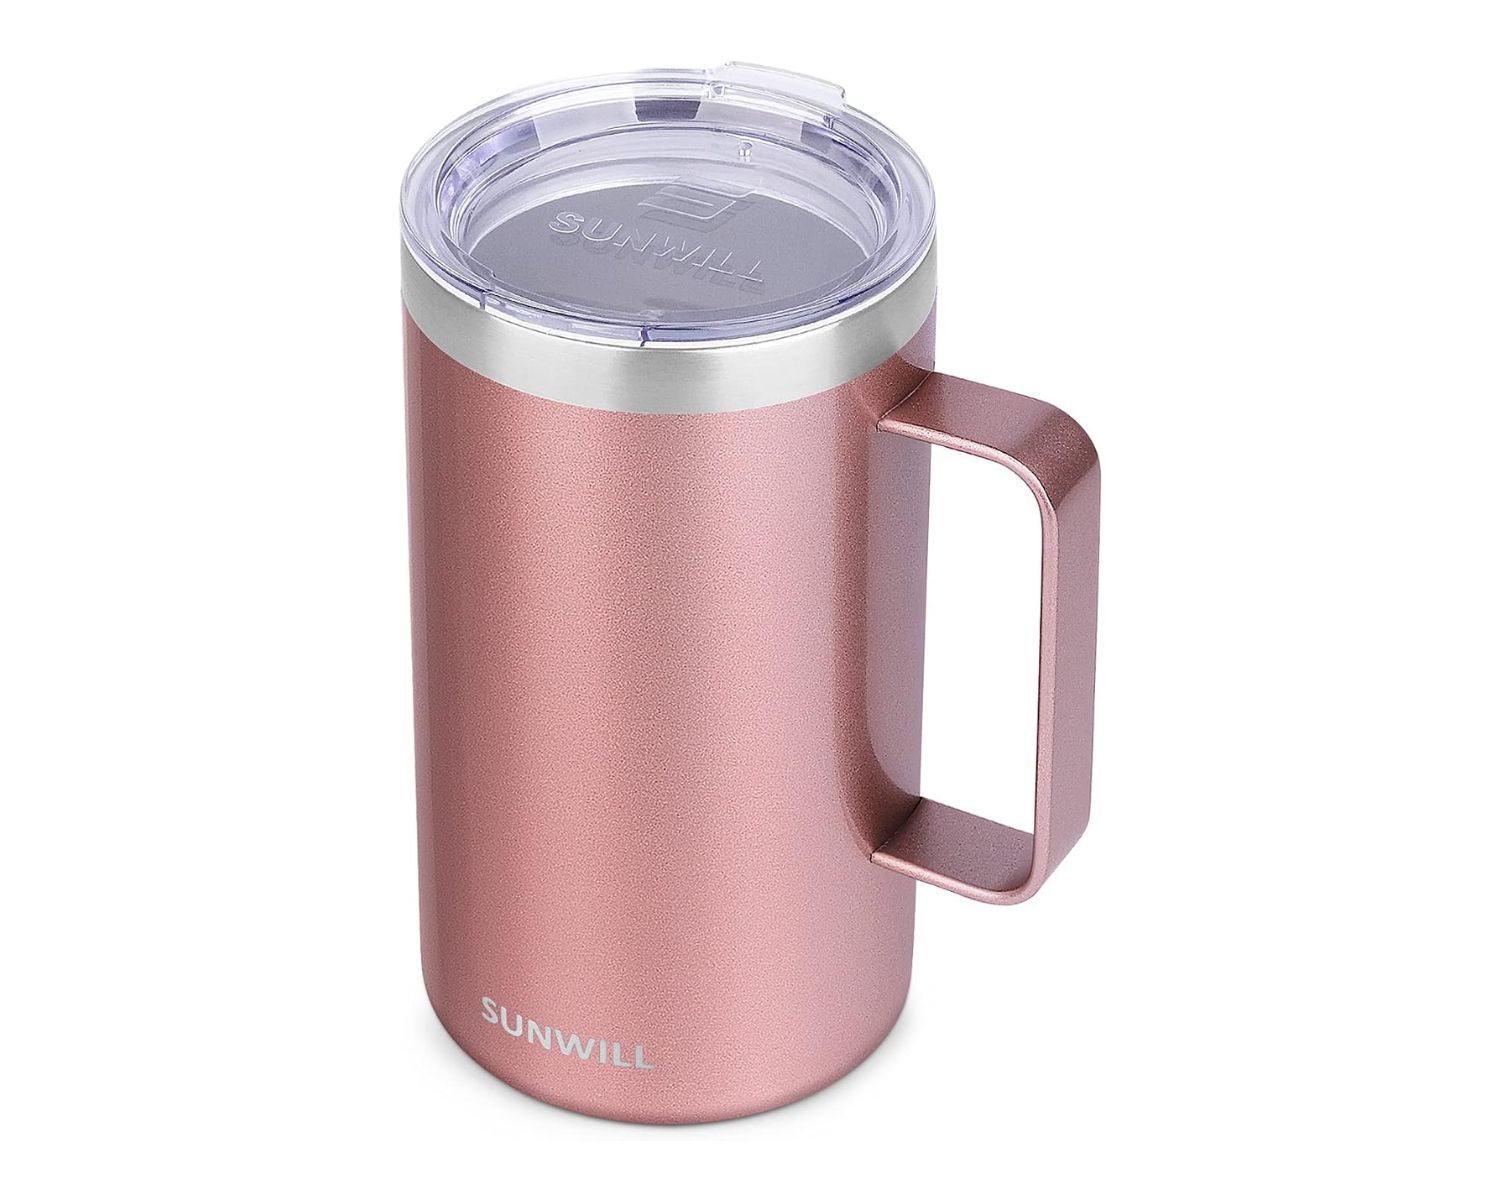 Insulated Camping Mug Review: Stay Warm on Your Outdoor Adventures